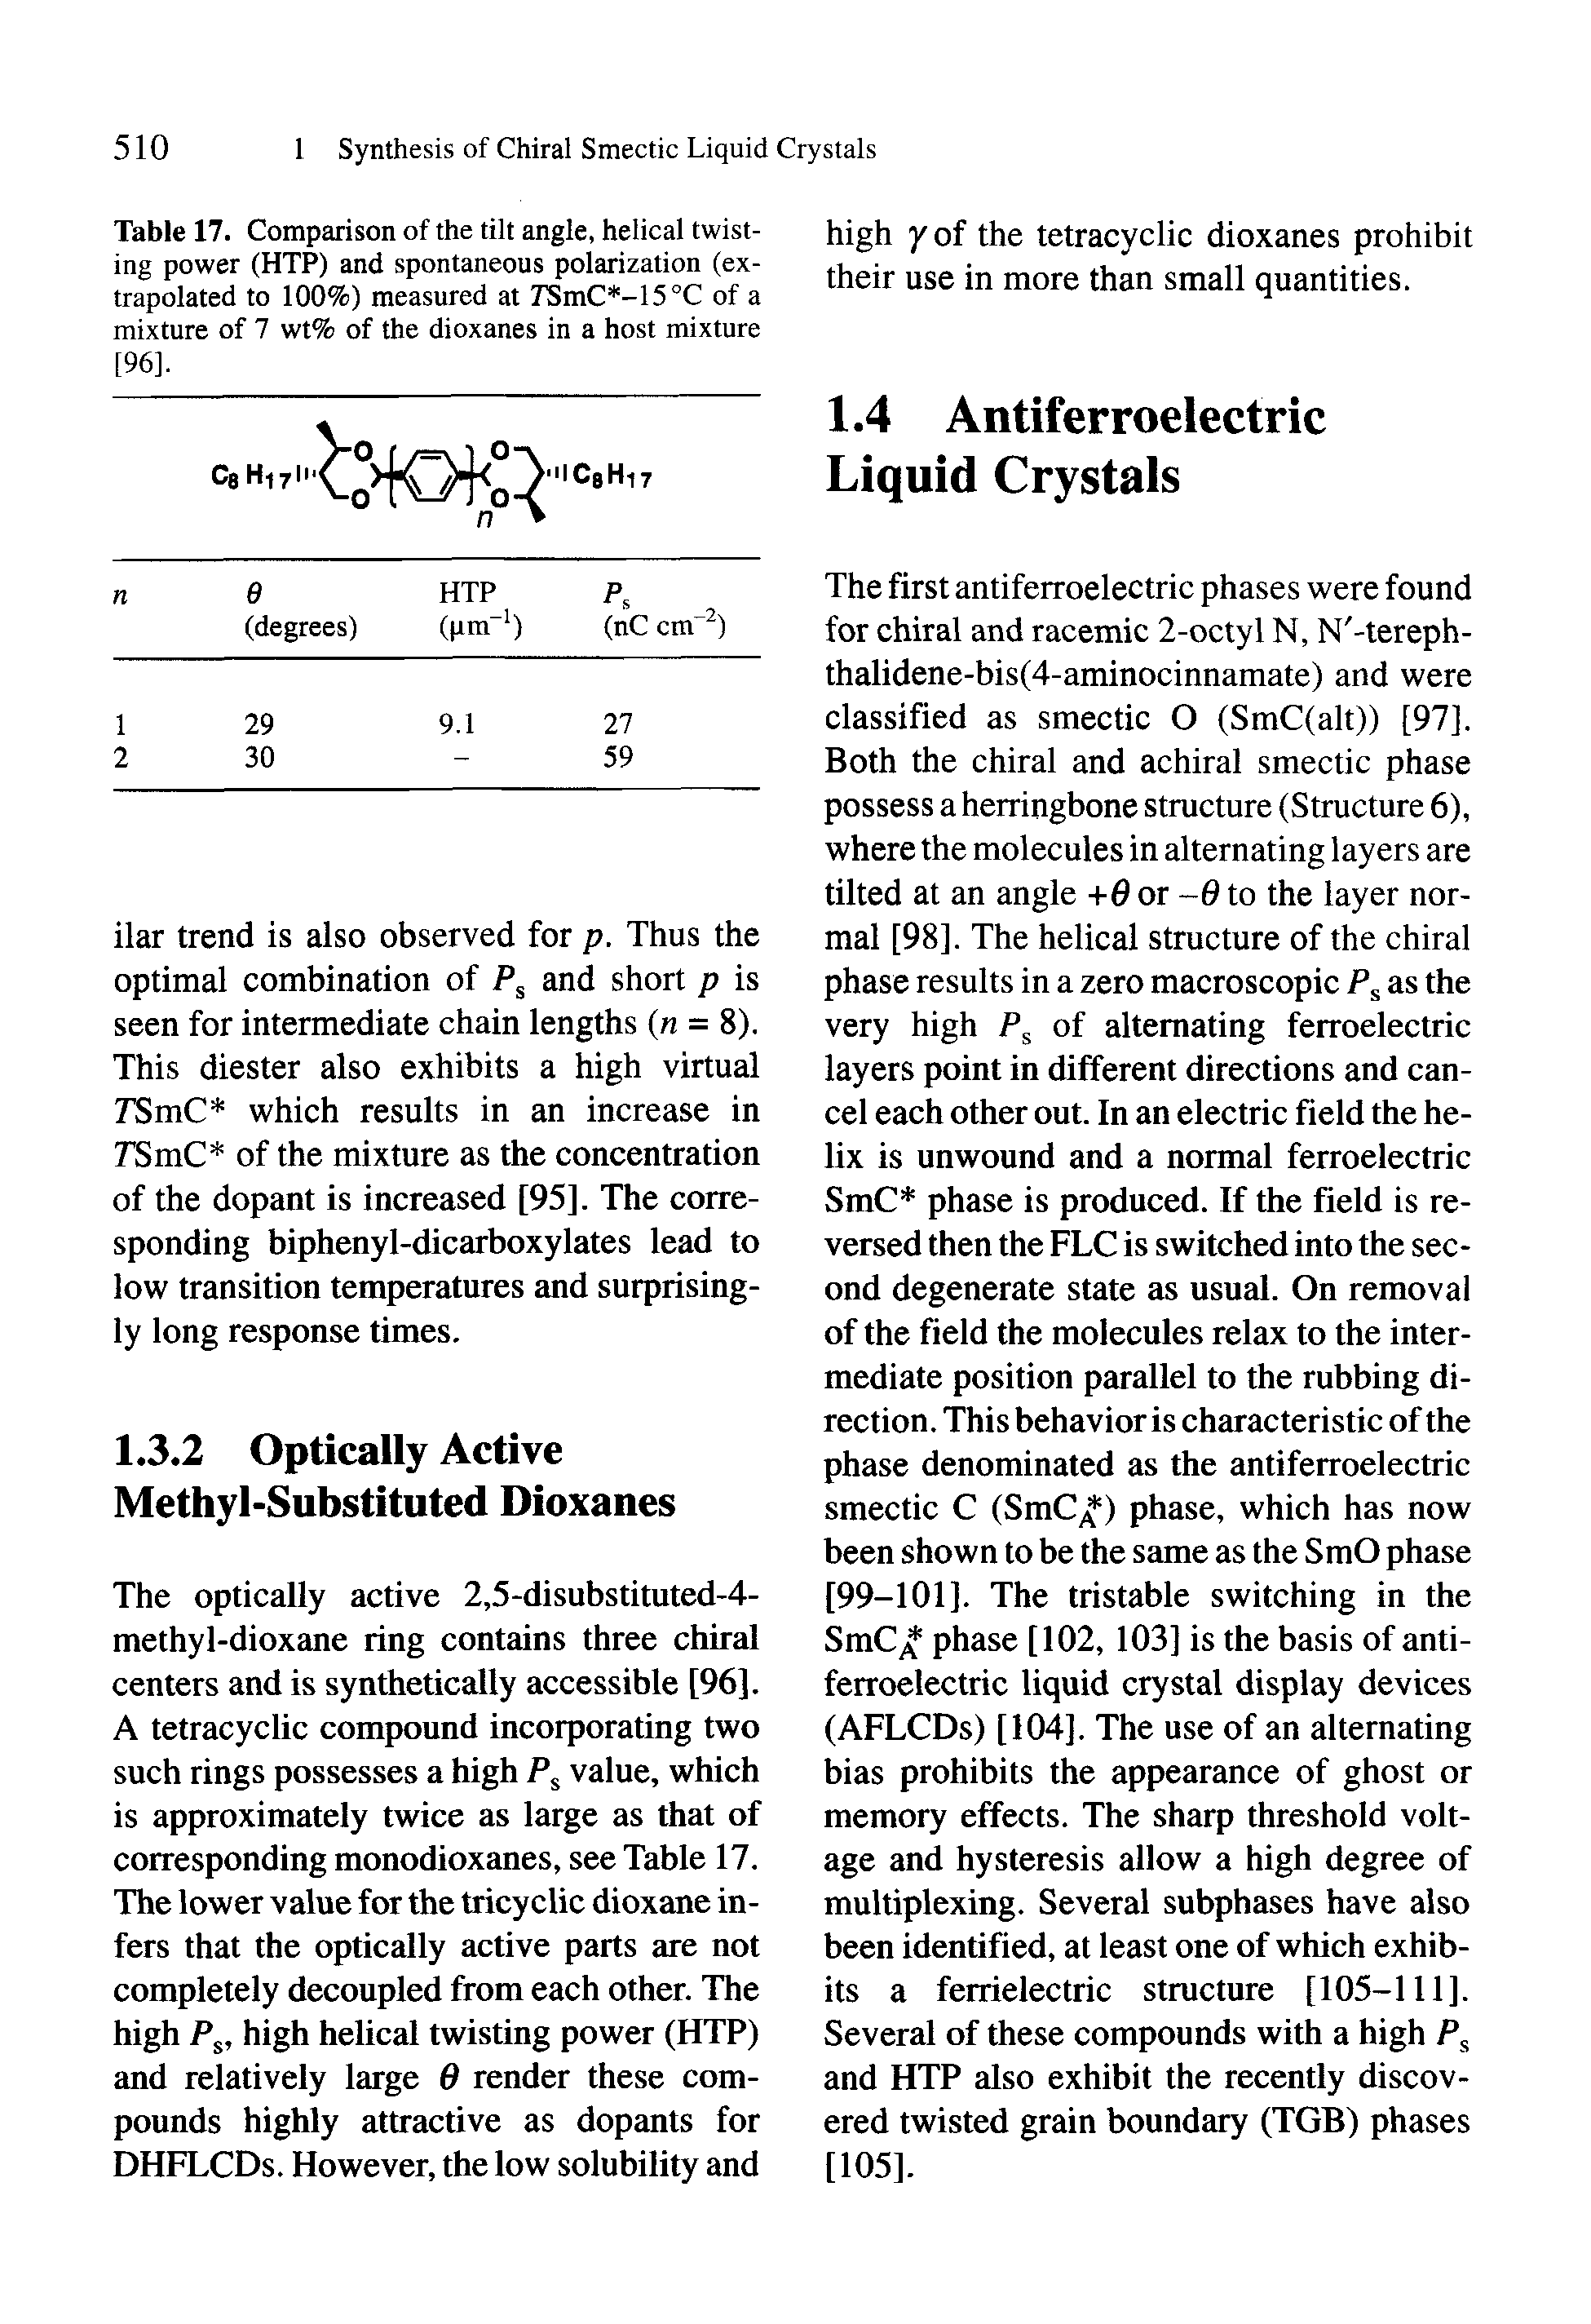 Table 17. Comparison of the tilt angle, helical twisting power (HTP) and spontaneous polarization (extrapolated to 100%) measured at 71SmC -15°C of a mixture of 7 wt% of the dioxanes in a host mixture [96],...